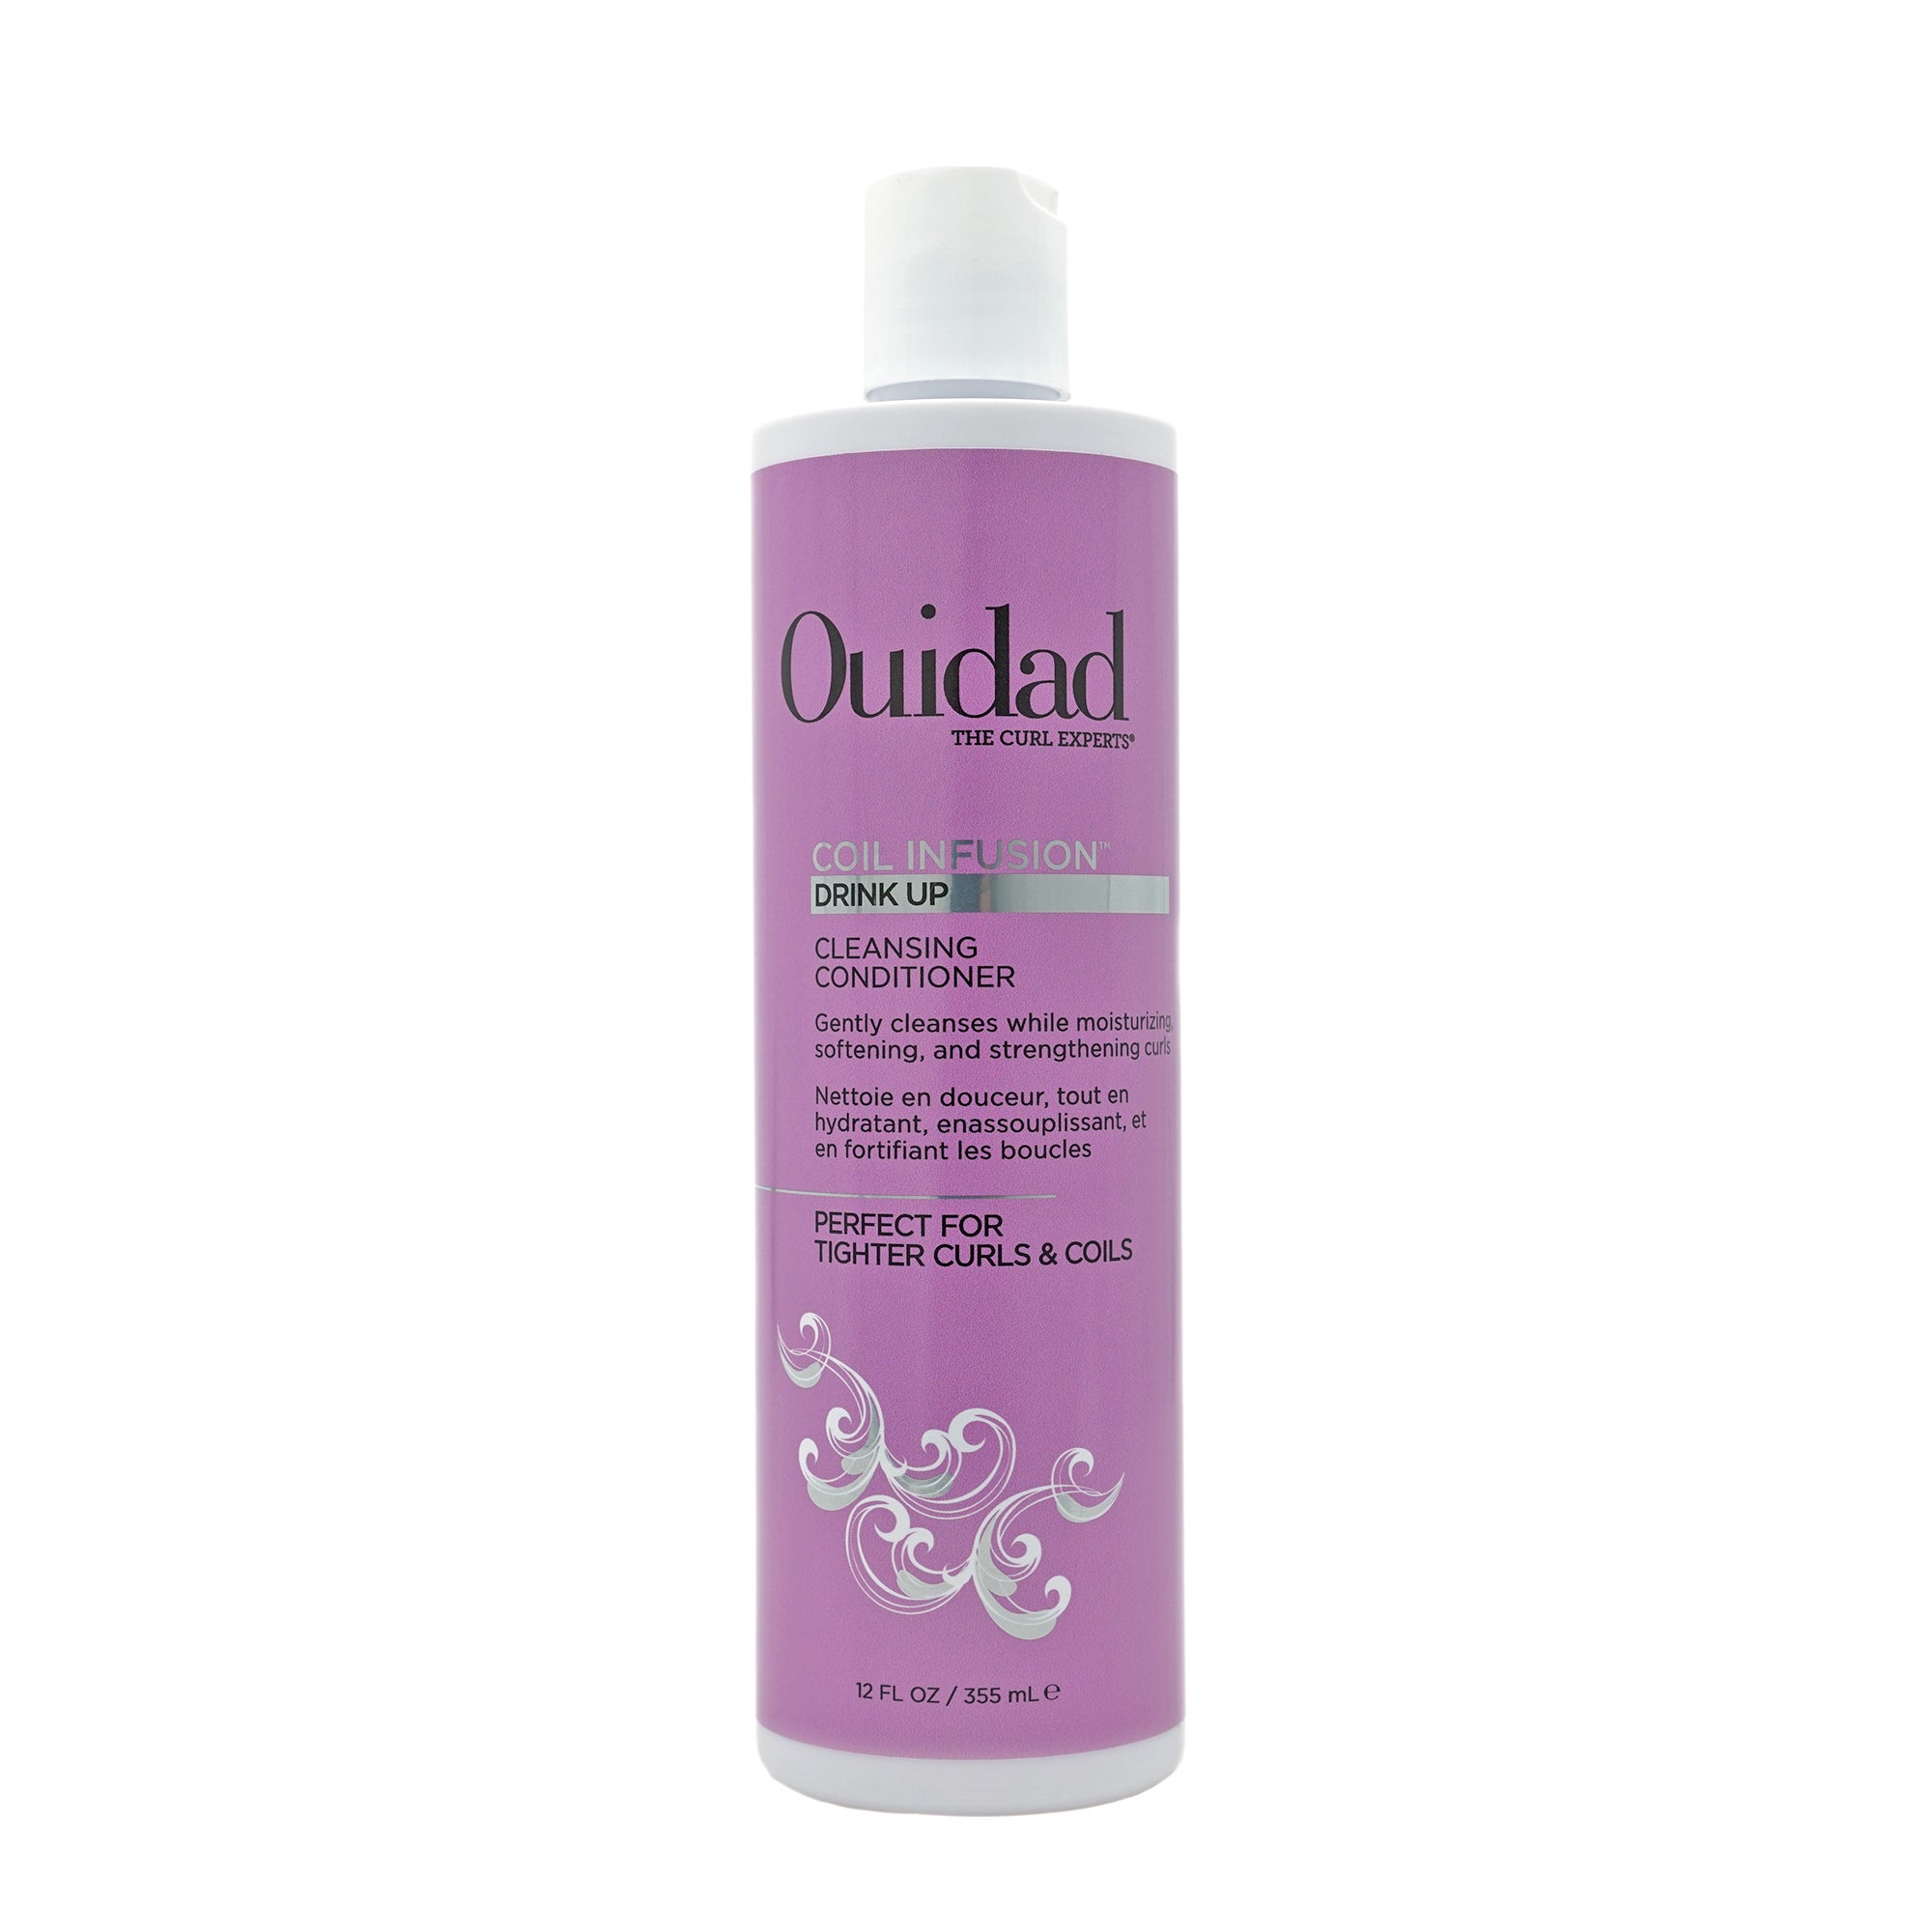 If Your Curls Need More Moisture, Ouidad's New Coil Infusion Collection Is A Dream Come True